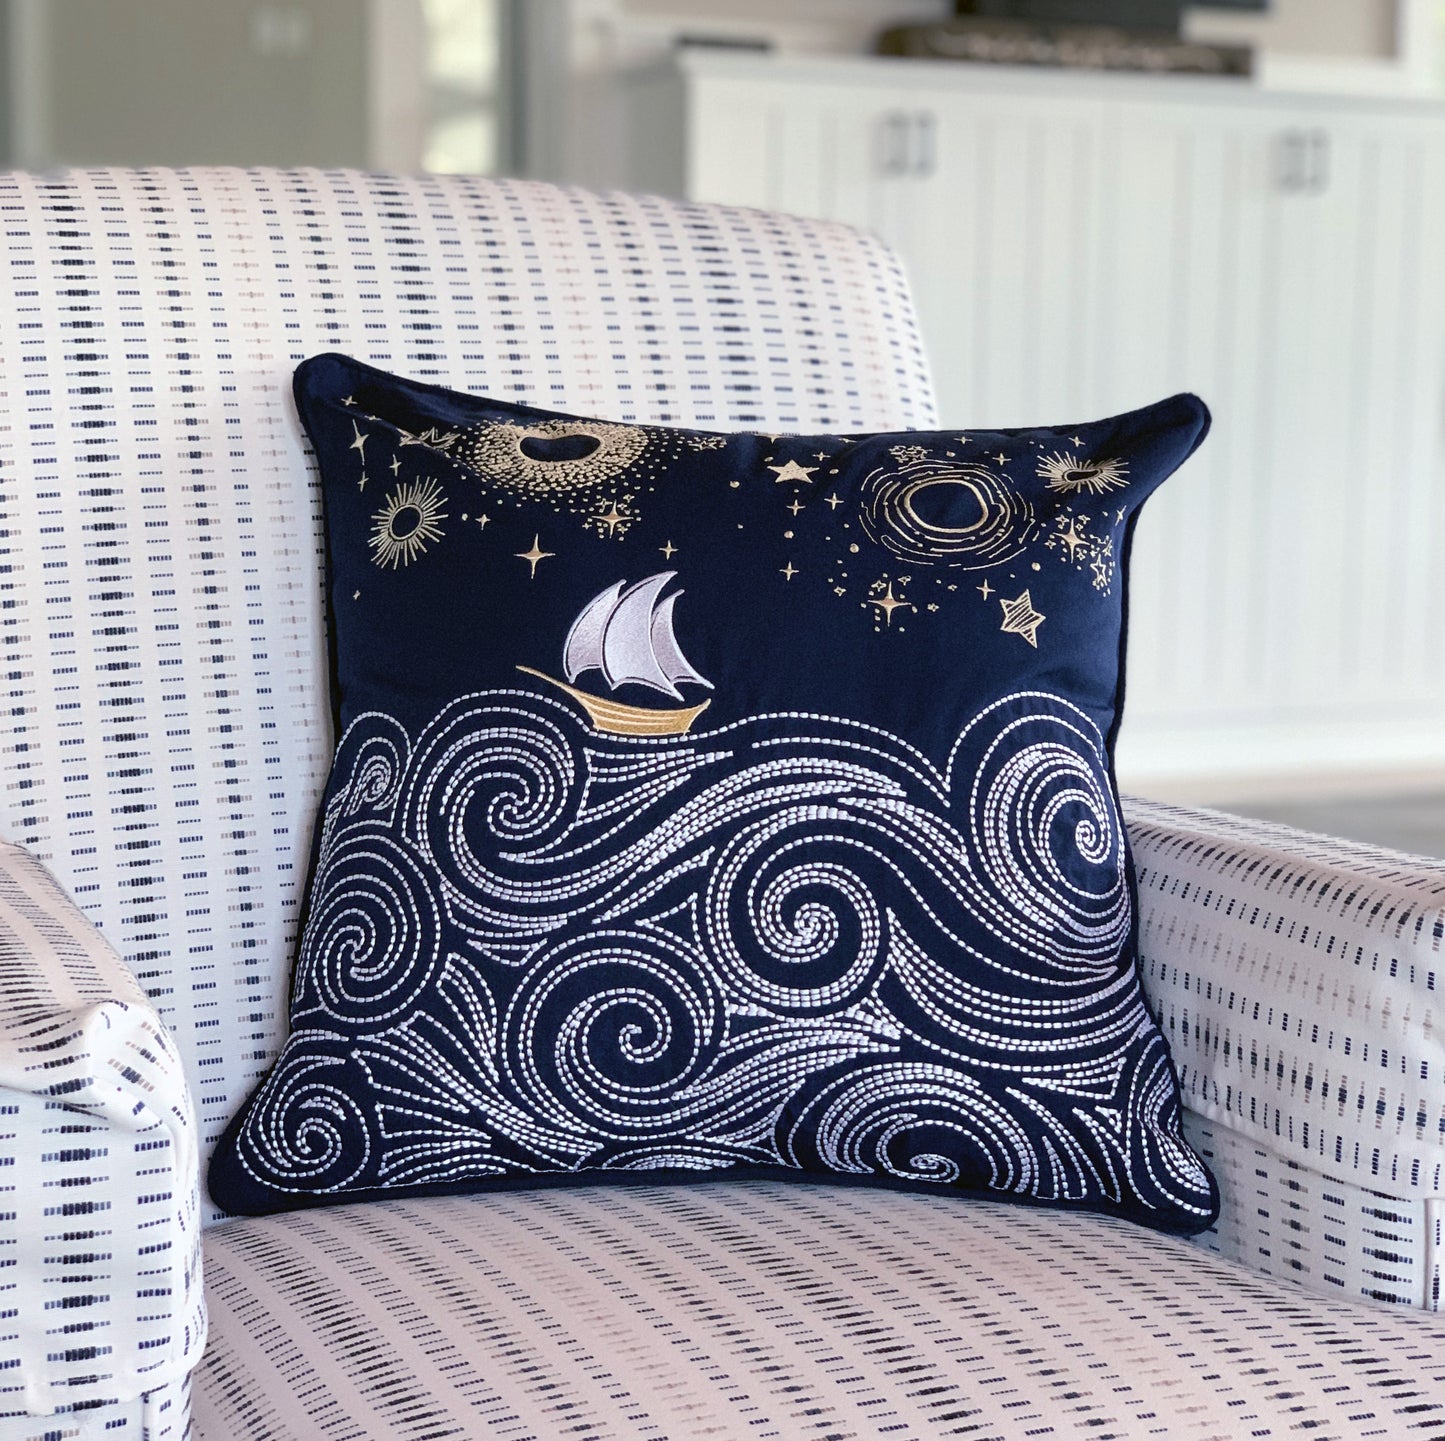 Cape Series Stormy Seas pillow styled on a patio chair.